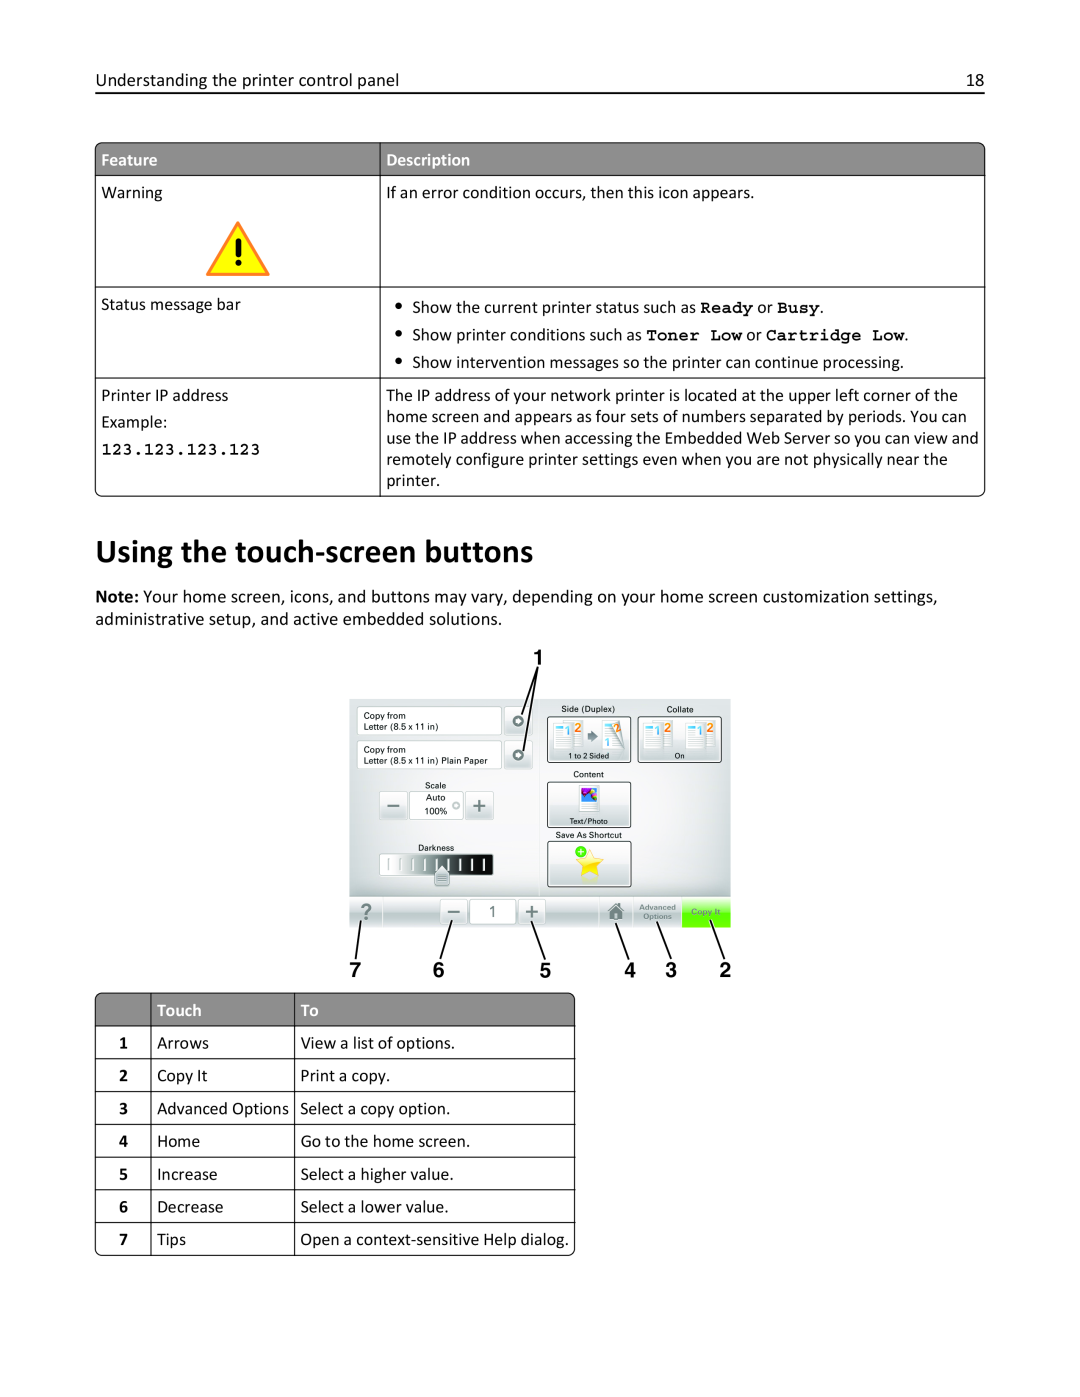 Lexmark 237, MX710 Using the touch-screen buttons, 123.123.123.123, Arrows, View a list of options, Copy It, Print a copy 